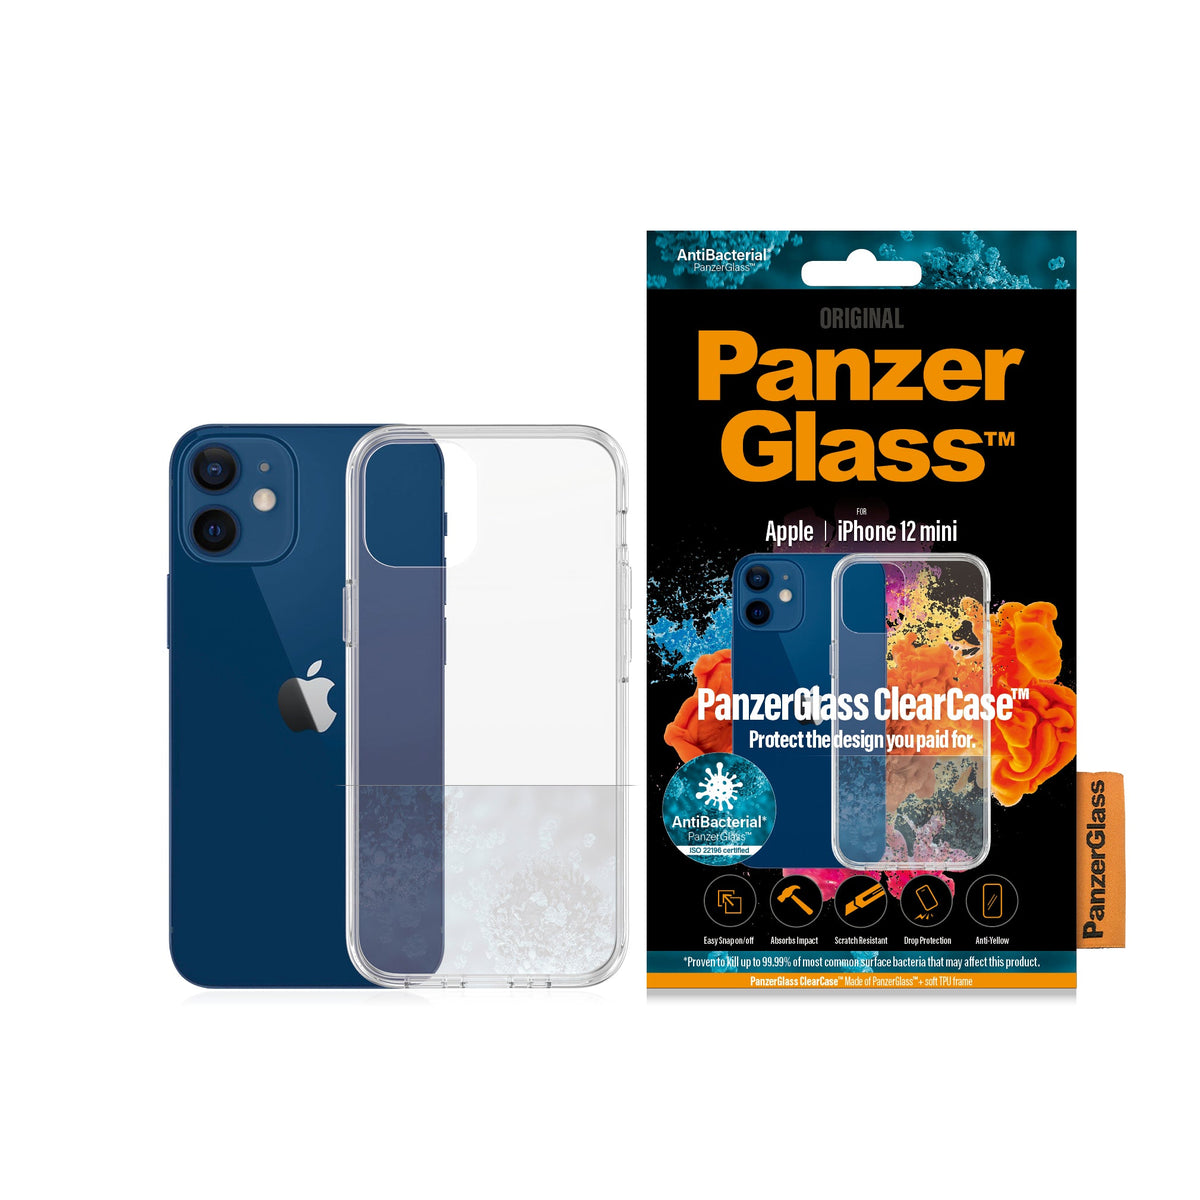 [OPEN BOX] PANZERGLASS iPhone 12 Mini - Clear Case Drop Protection Treated w/Anti-Microbial